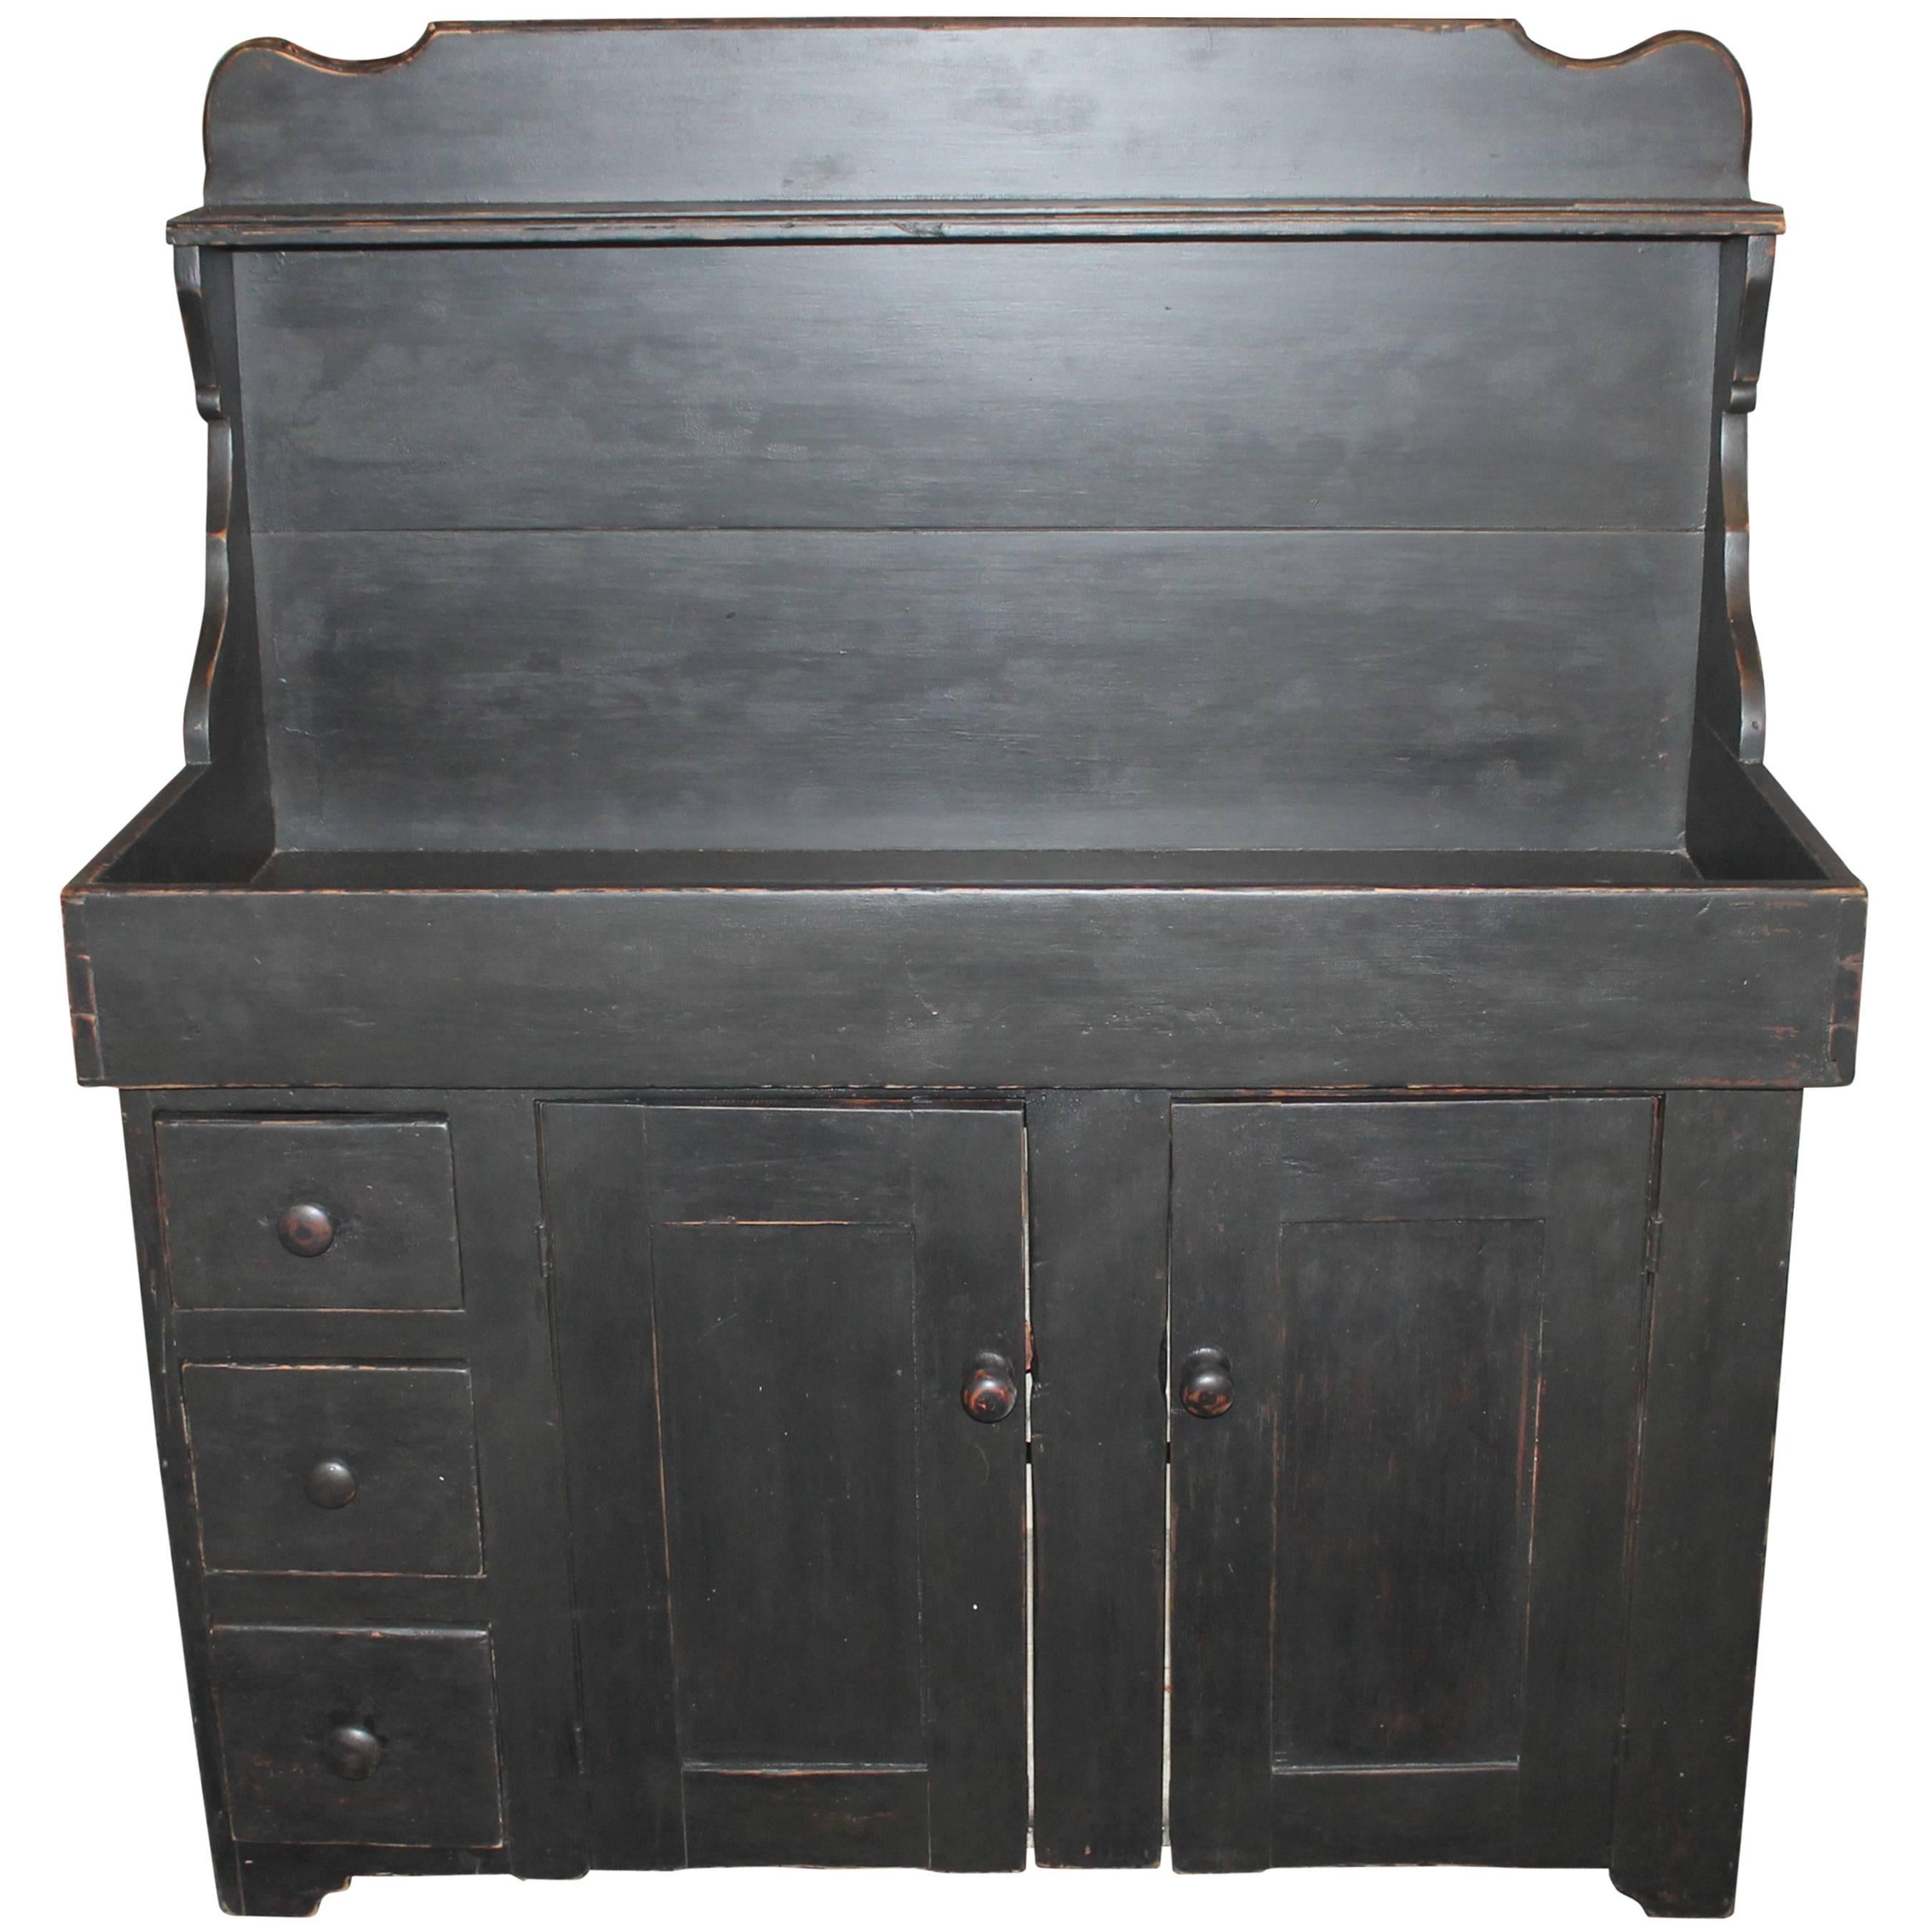 19th Century Lancaster County, Pennsylvania Black Painted High Back Dry Sink